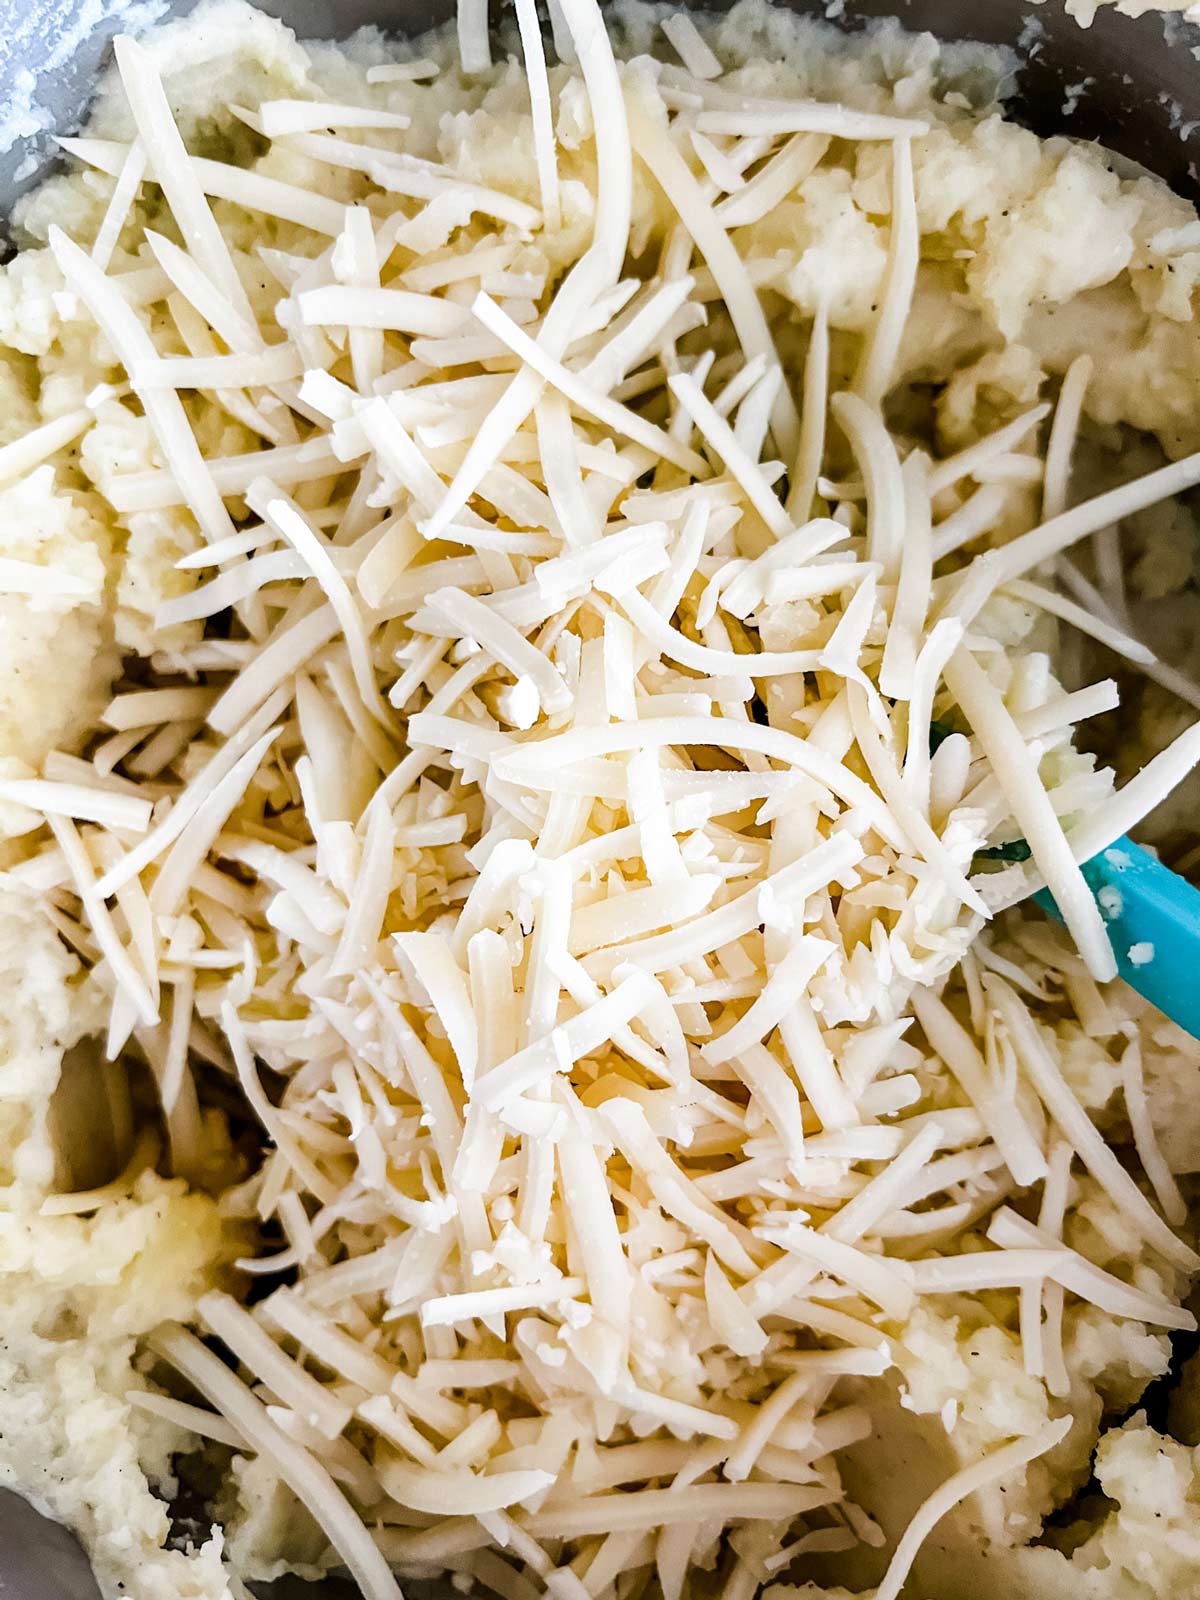 Shredded cheese being stirred into potatoes.